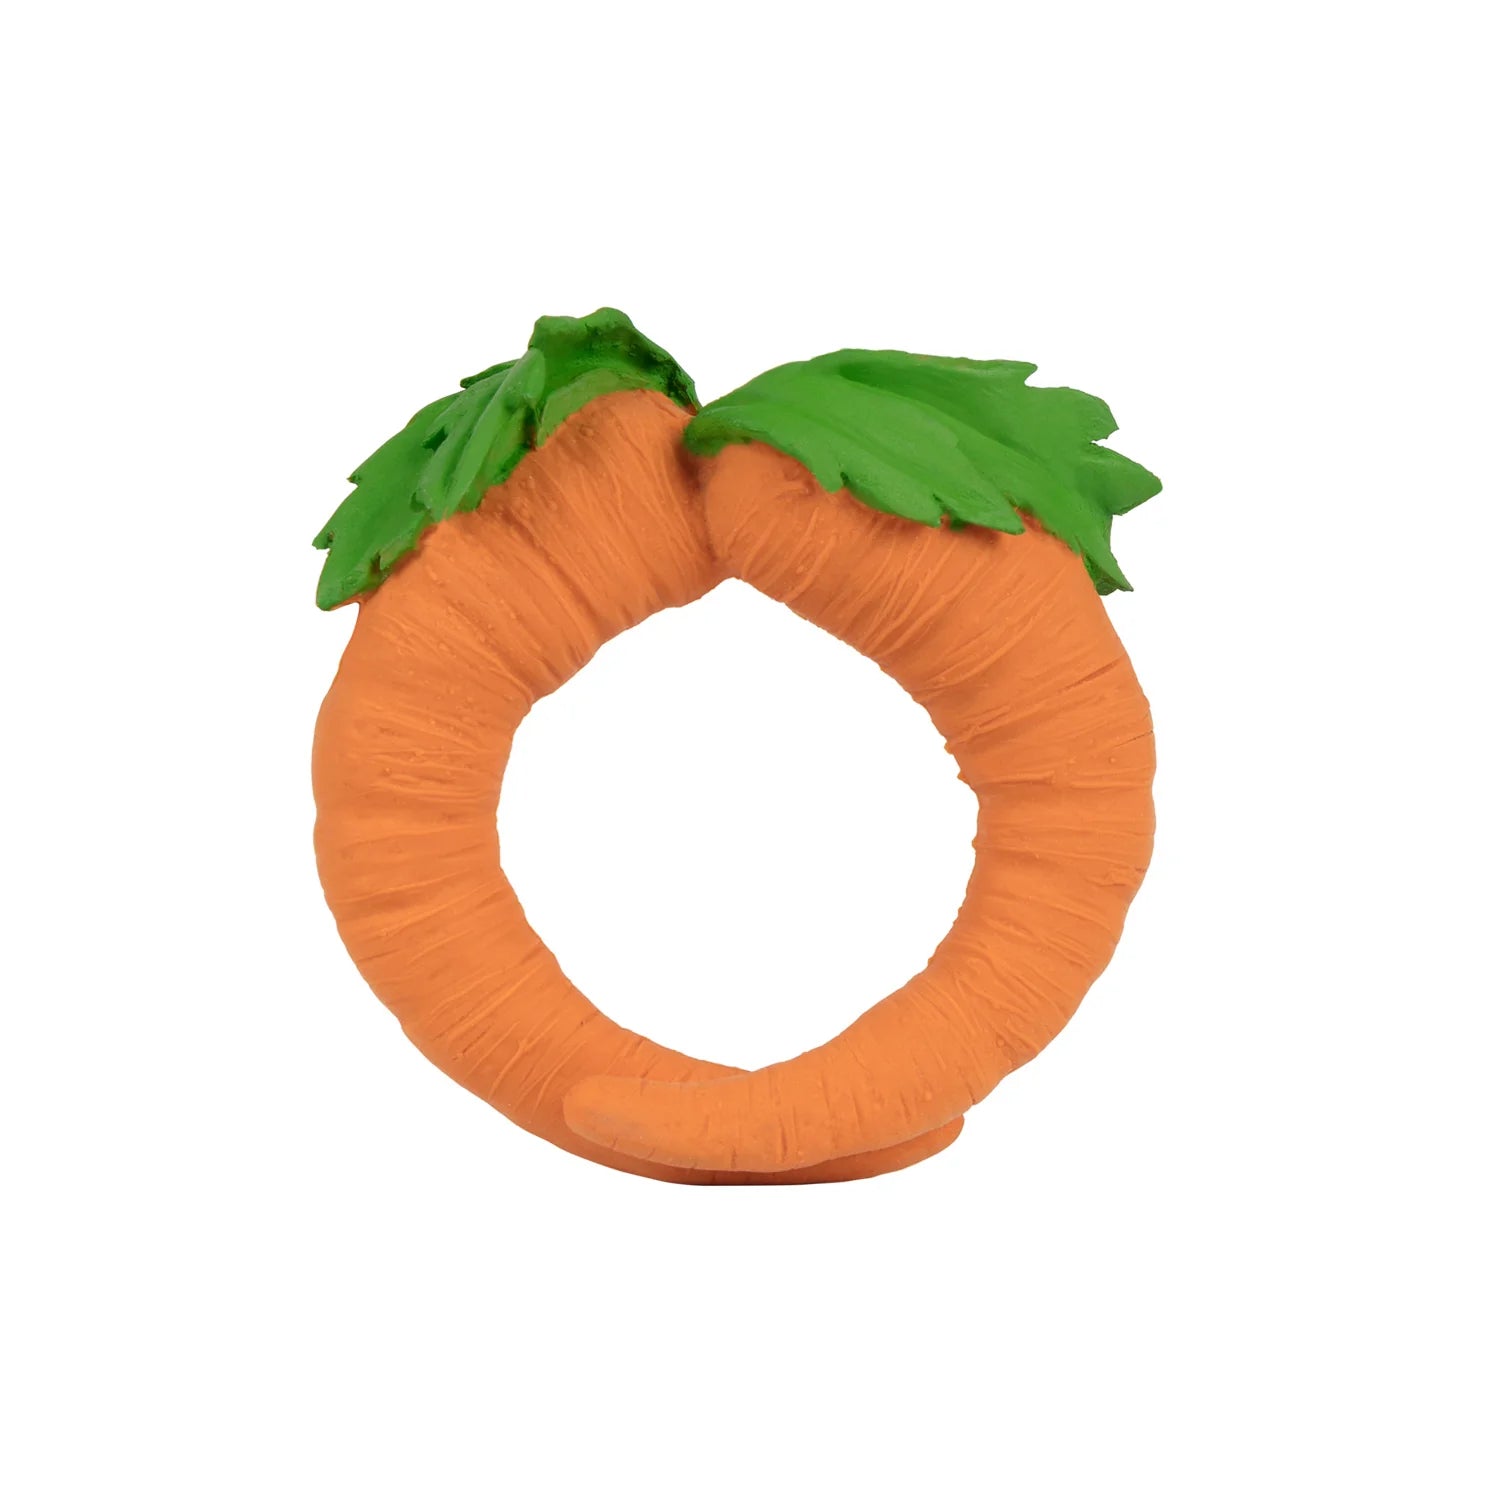 Cathy The Carrot, Bath Toy & Teether